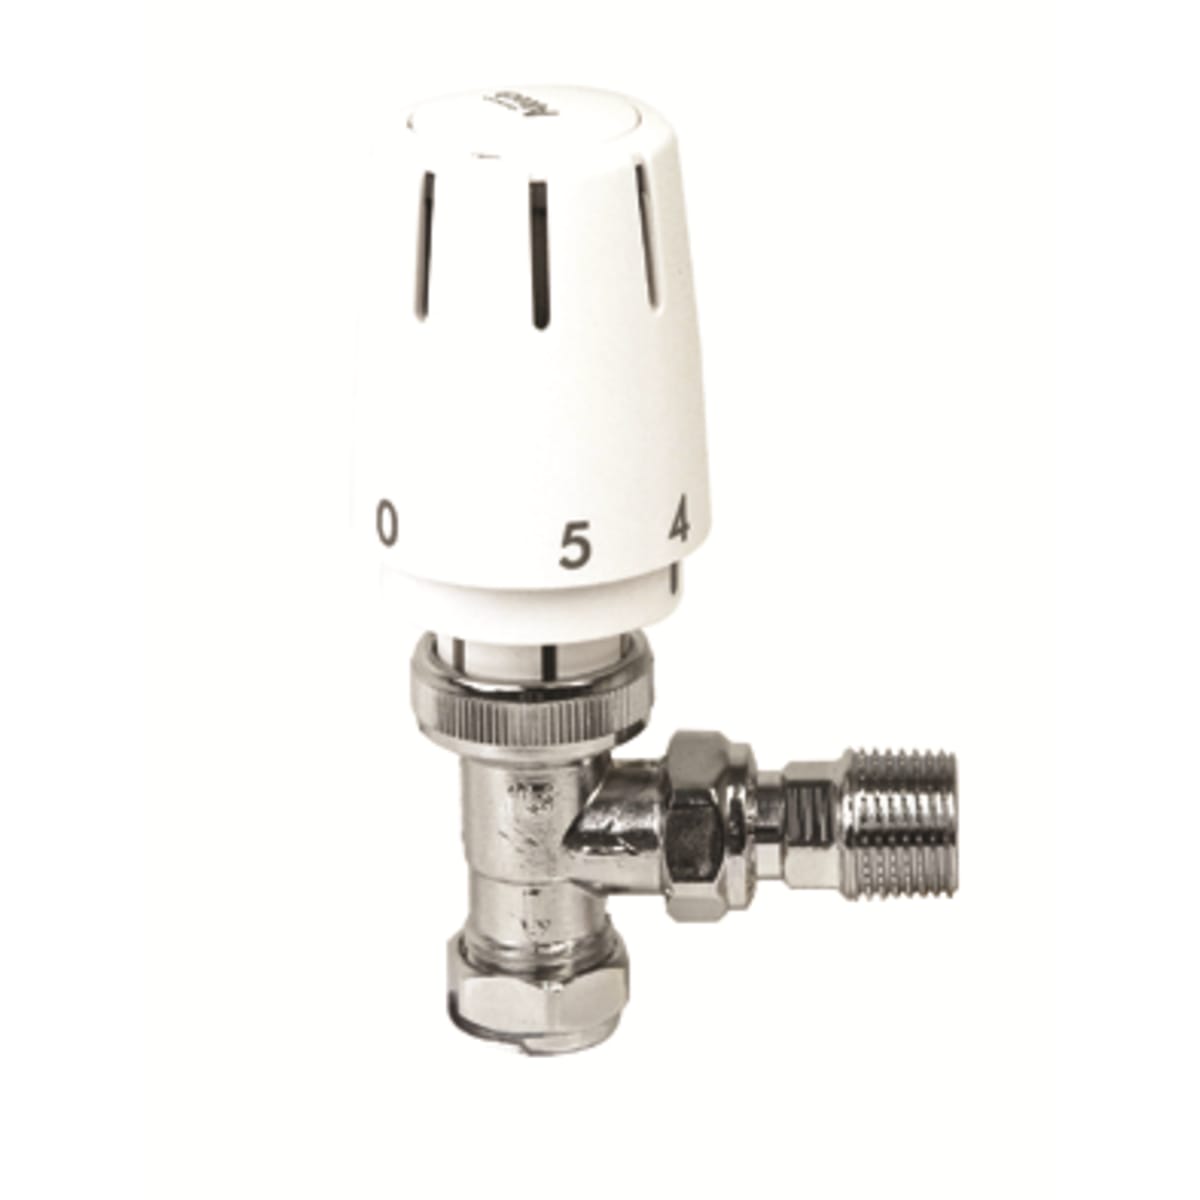 CONTRACT BI-DIRECTIONAL ANGLED THERMOSTATIC RADIATOR VALVE 15mm TRV TEAMS 